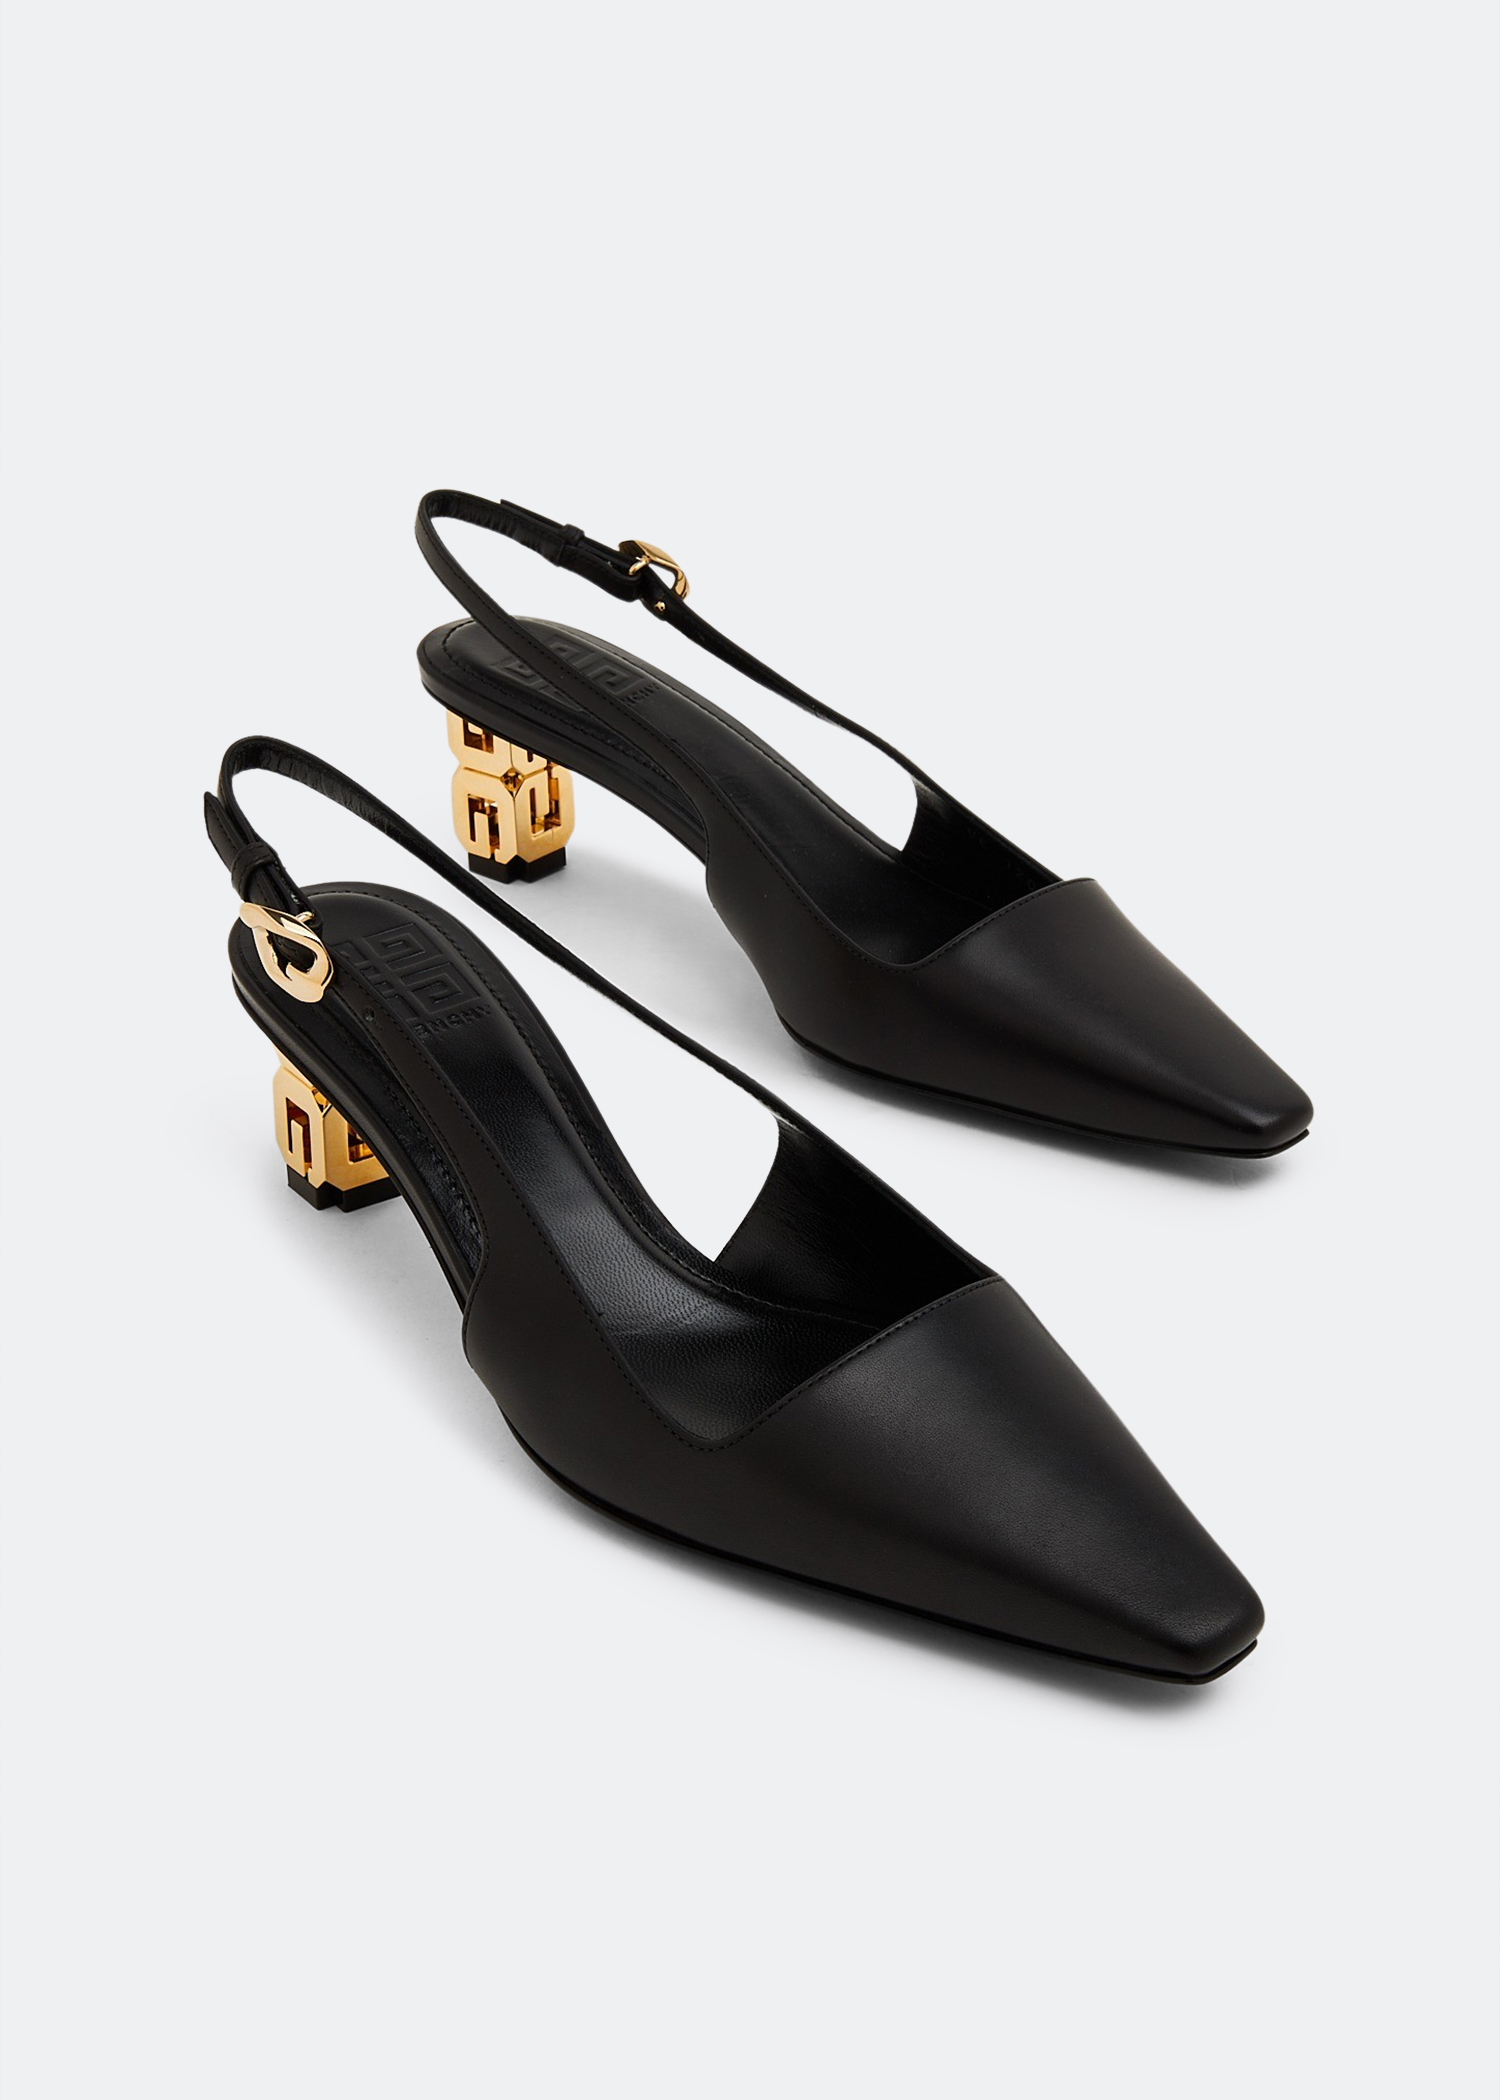 Givenchy G Cube slingback pumps for Women - Black in UAE